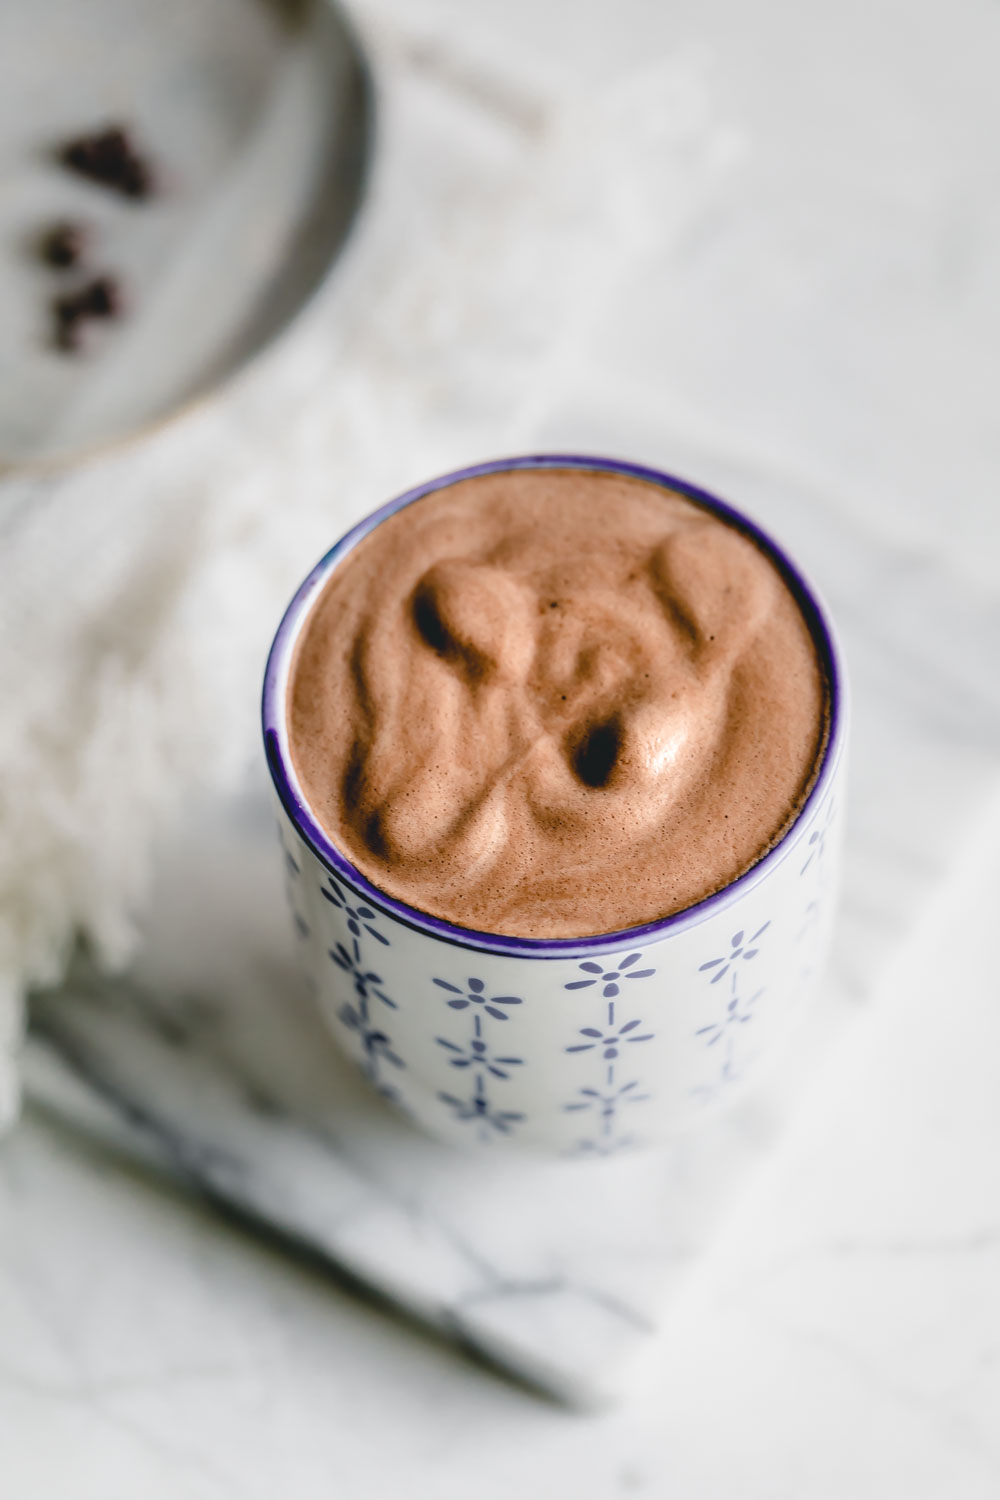 Vegan hot chocolate drink in a blue and white mug on a white backdrop with a marble board